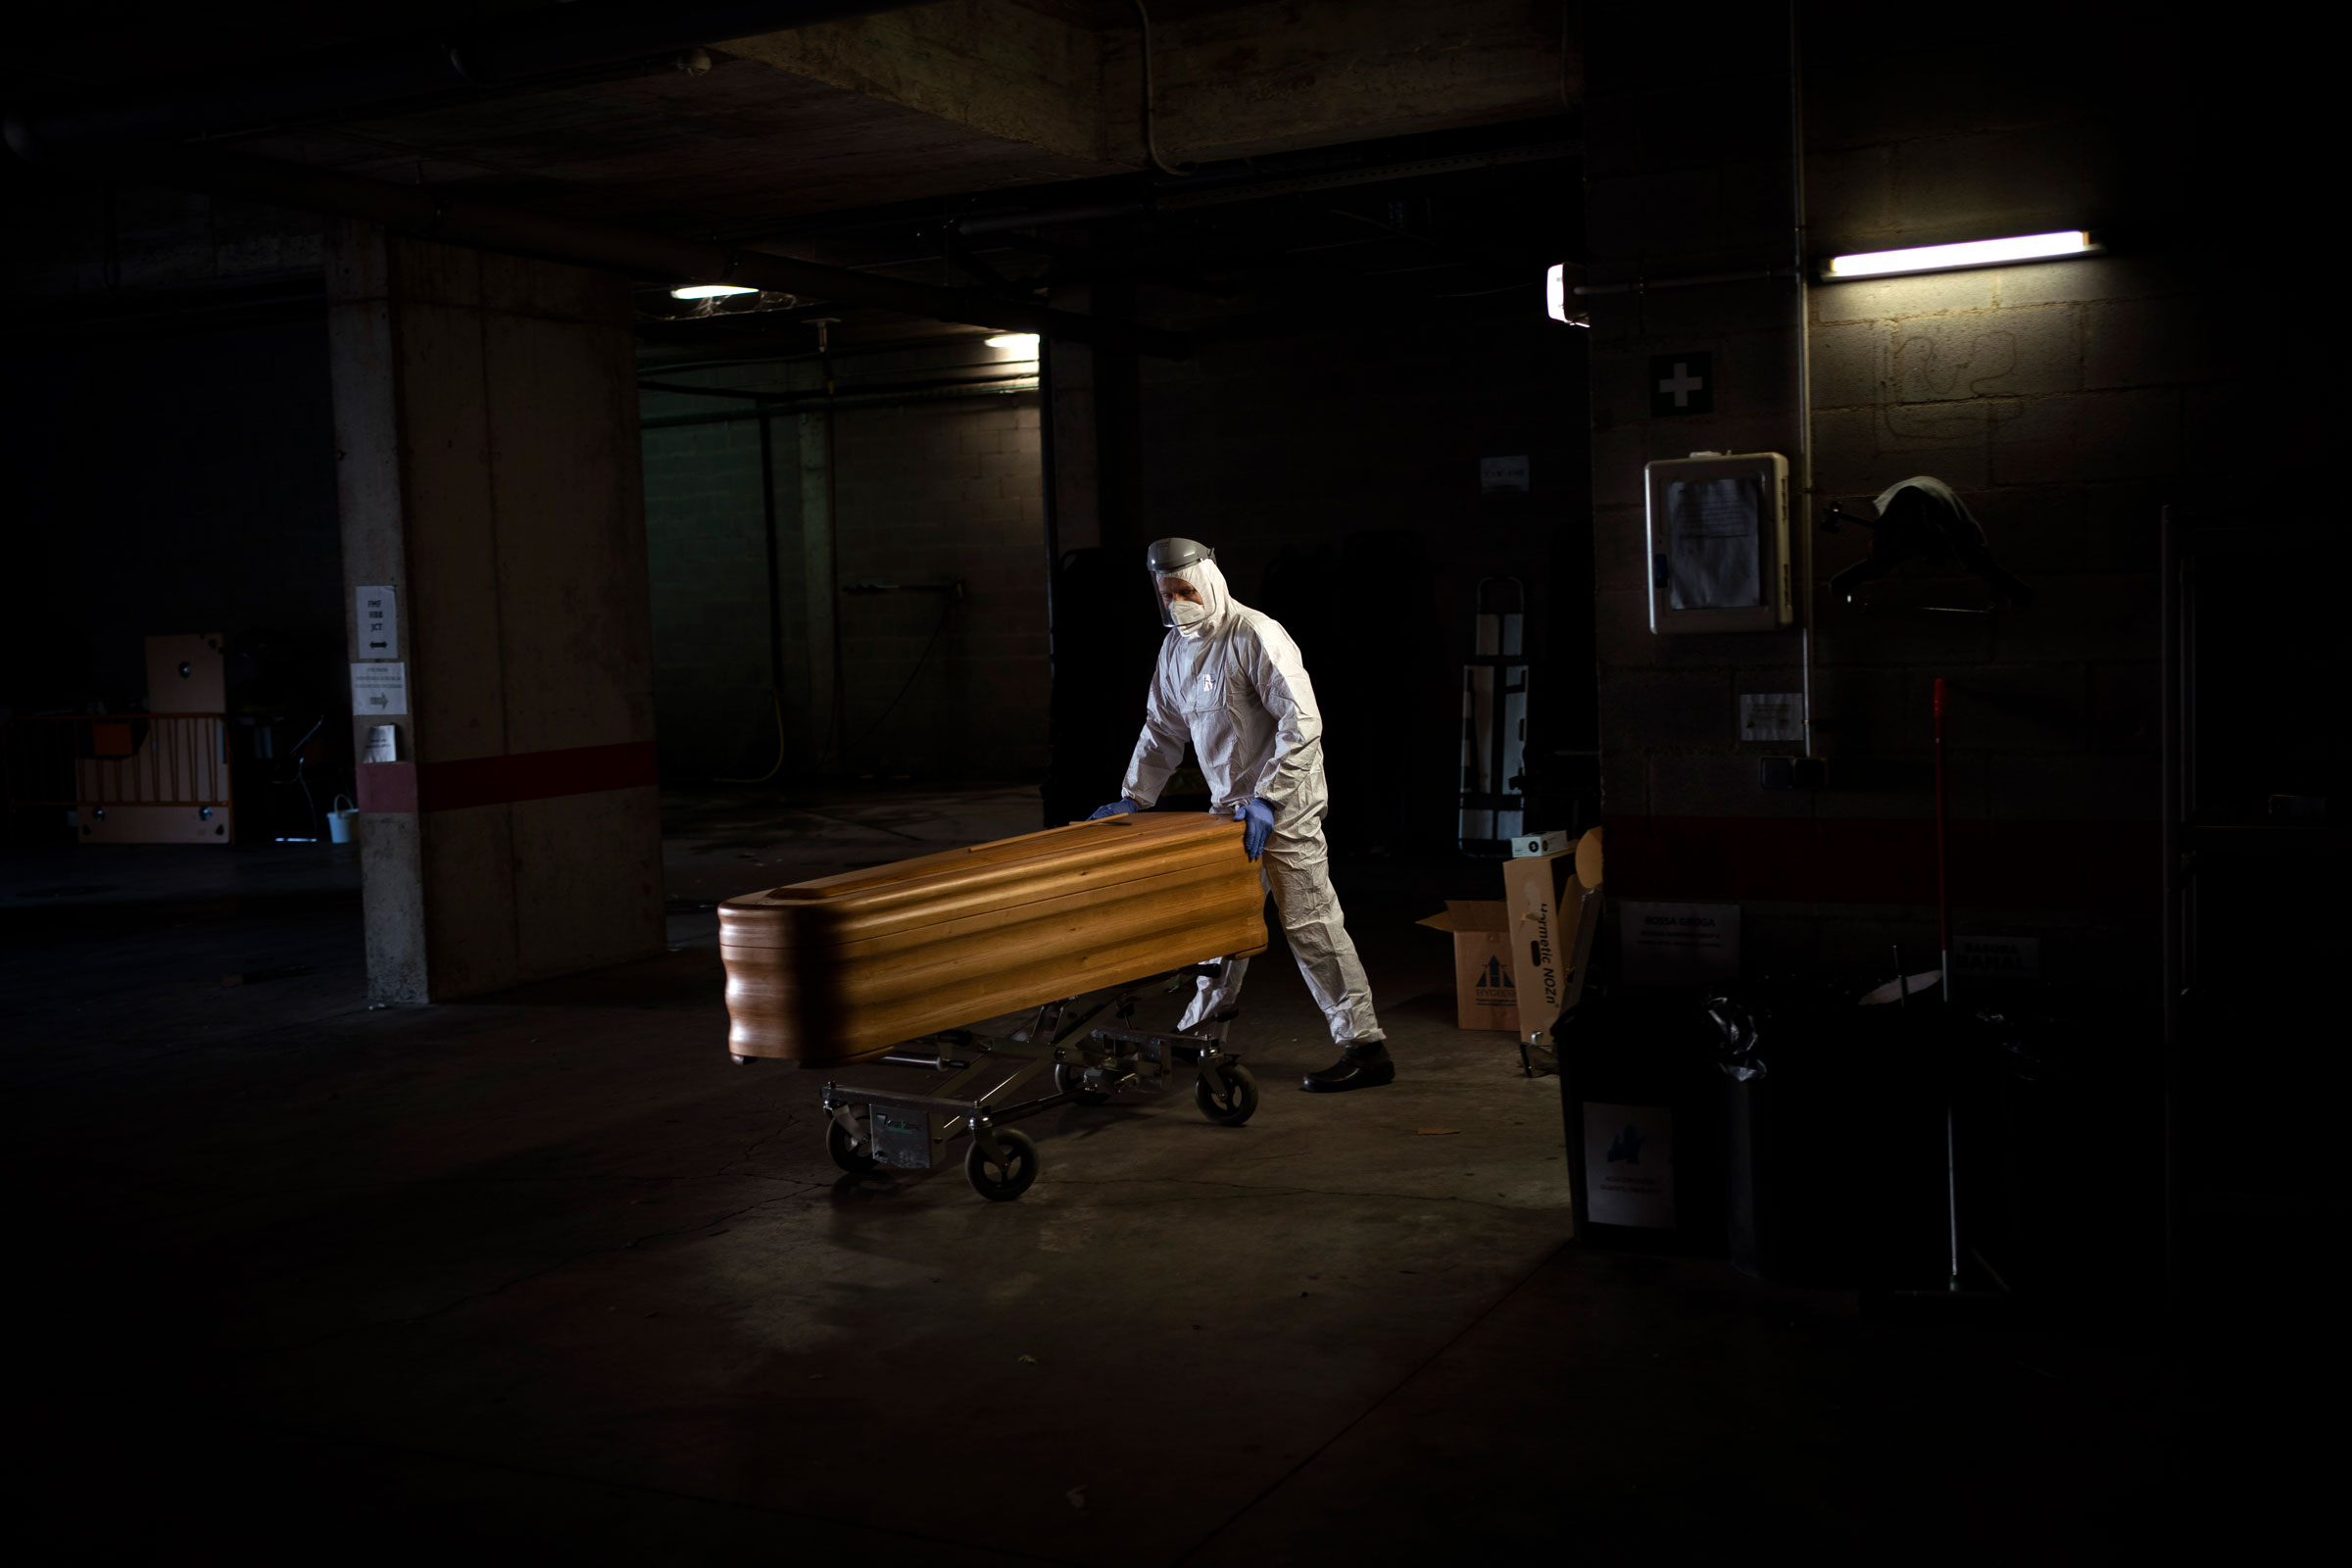 A mortuary worker moves a coffin carrying the body of a person who died of COVID-19 ahead of a funeral at Memora mortuary in Girona, Spain, Thursday, Feb. 4, 2021. (Emilio Morenatti—AP)